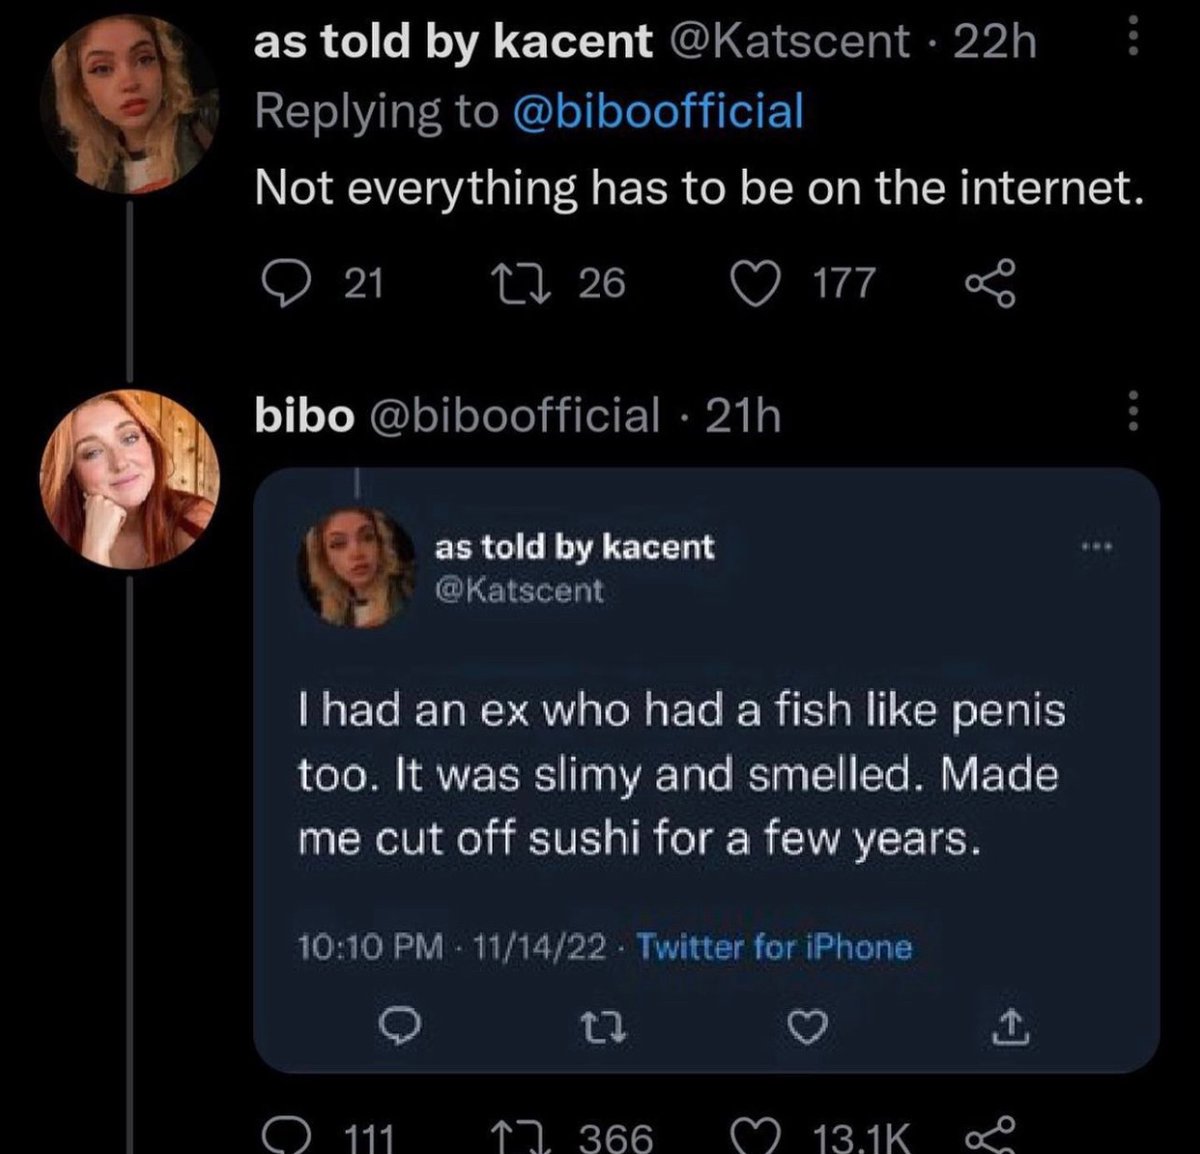 the internet hall of shame - screenshot - as told by kacent 22h Not everything has to be on the internet. 21 26 bibo 21h as told by kacent 111 I had an ex who had a fish penis too. It was slimy and smelled. Made me cut off sushi for a few years. 111422 Tw